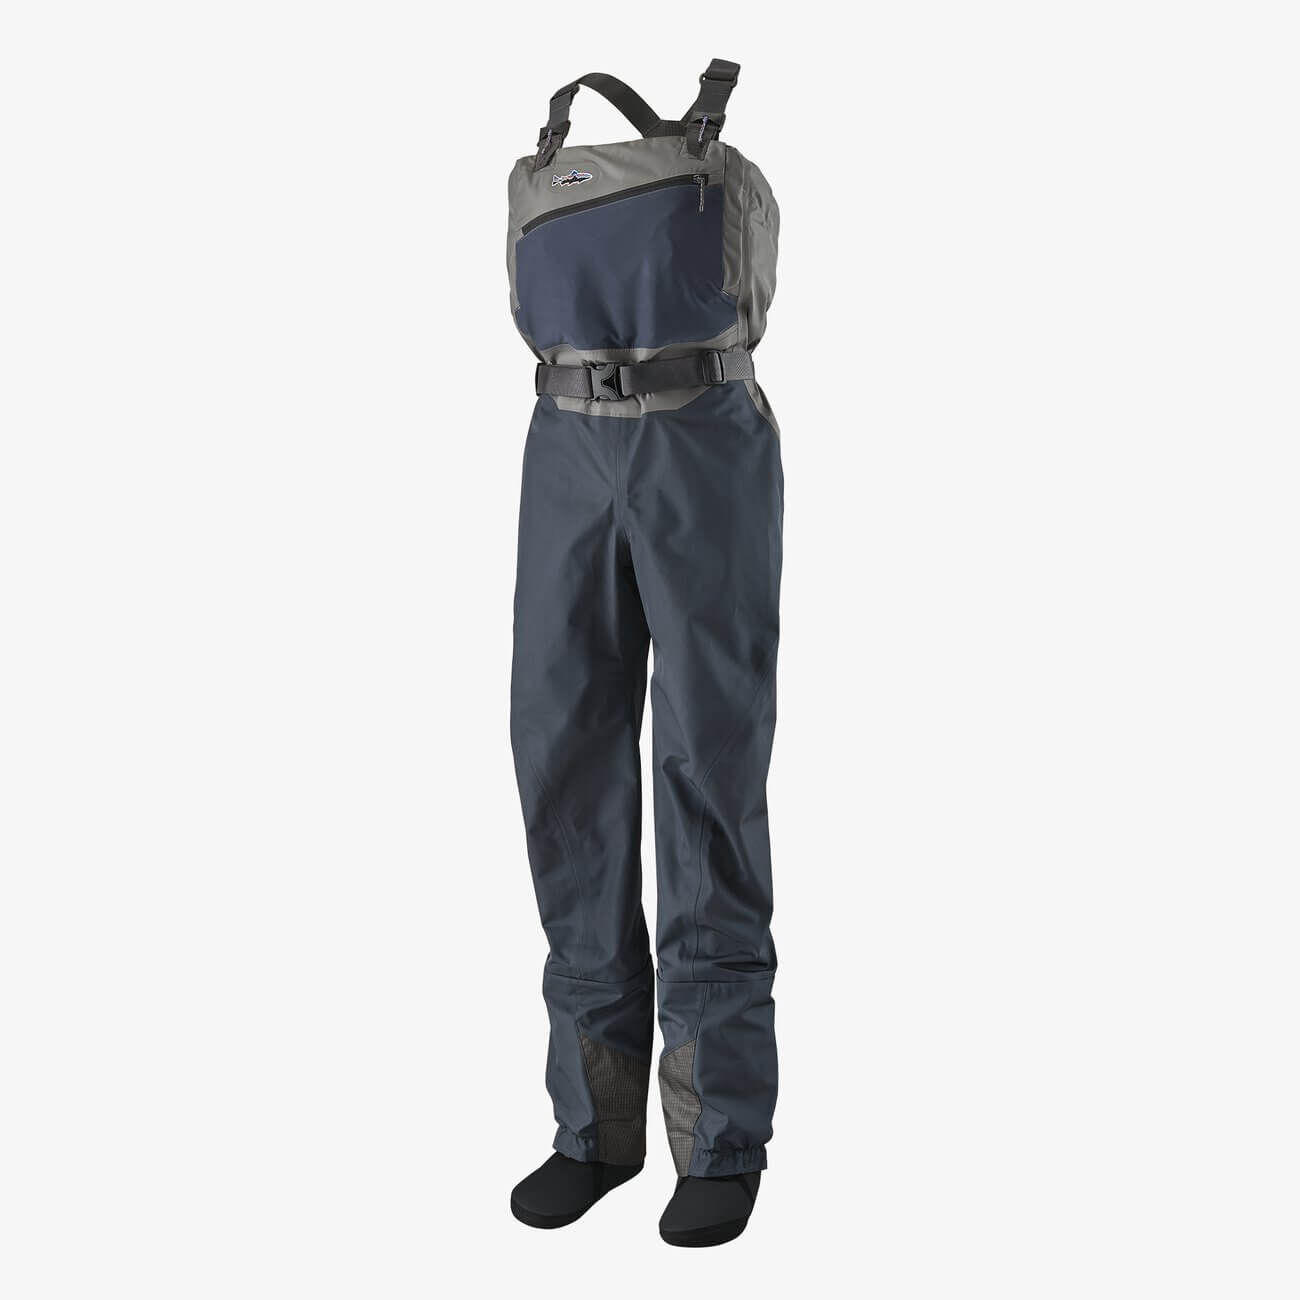 Patagonia Women's Swiftcurrent Waders 2020 - XRM (Extra Large Regular)